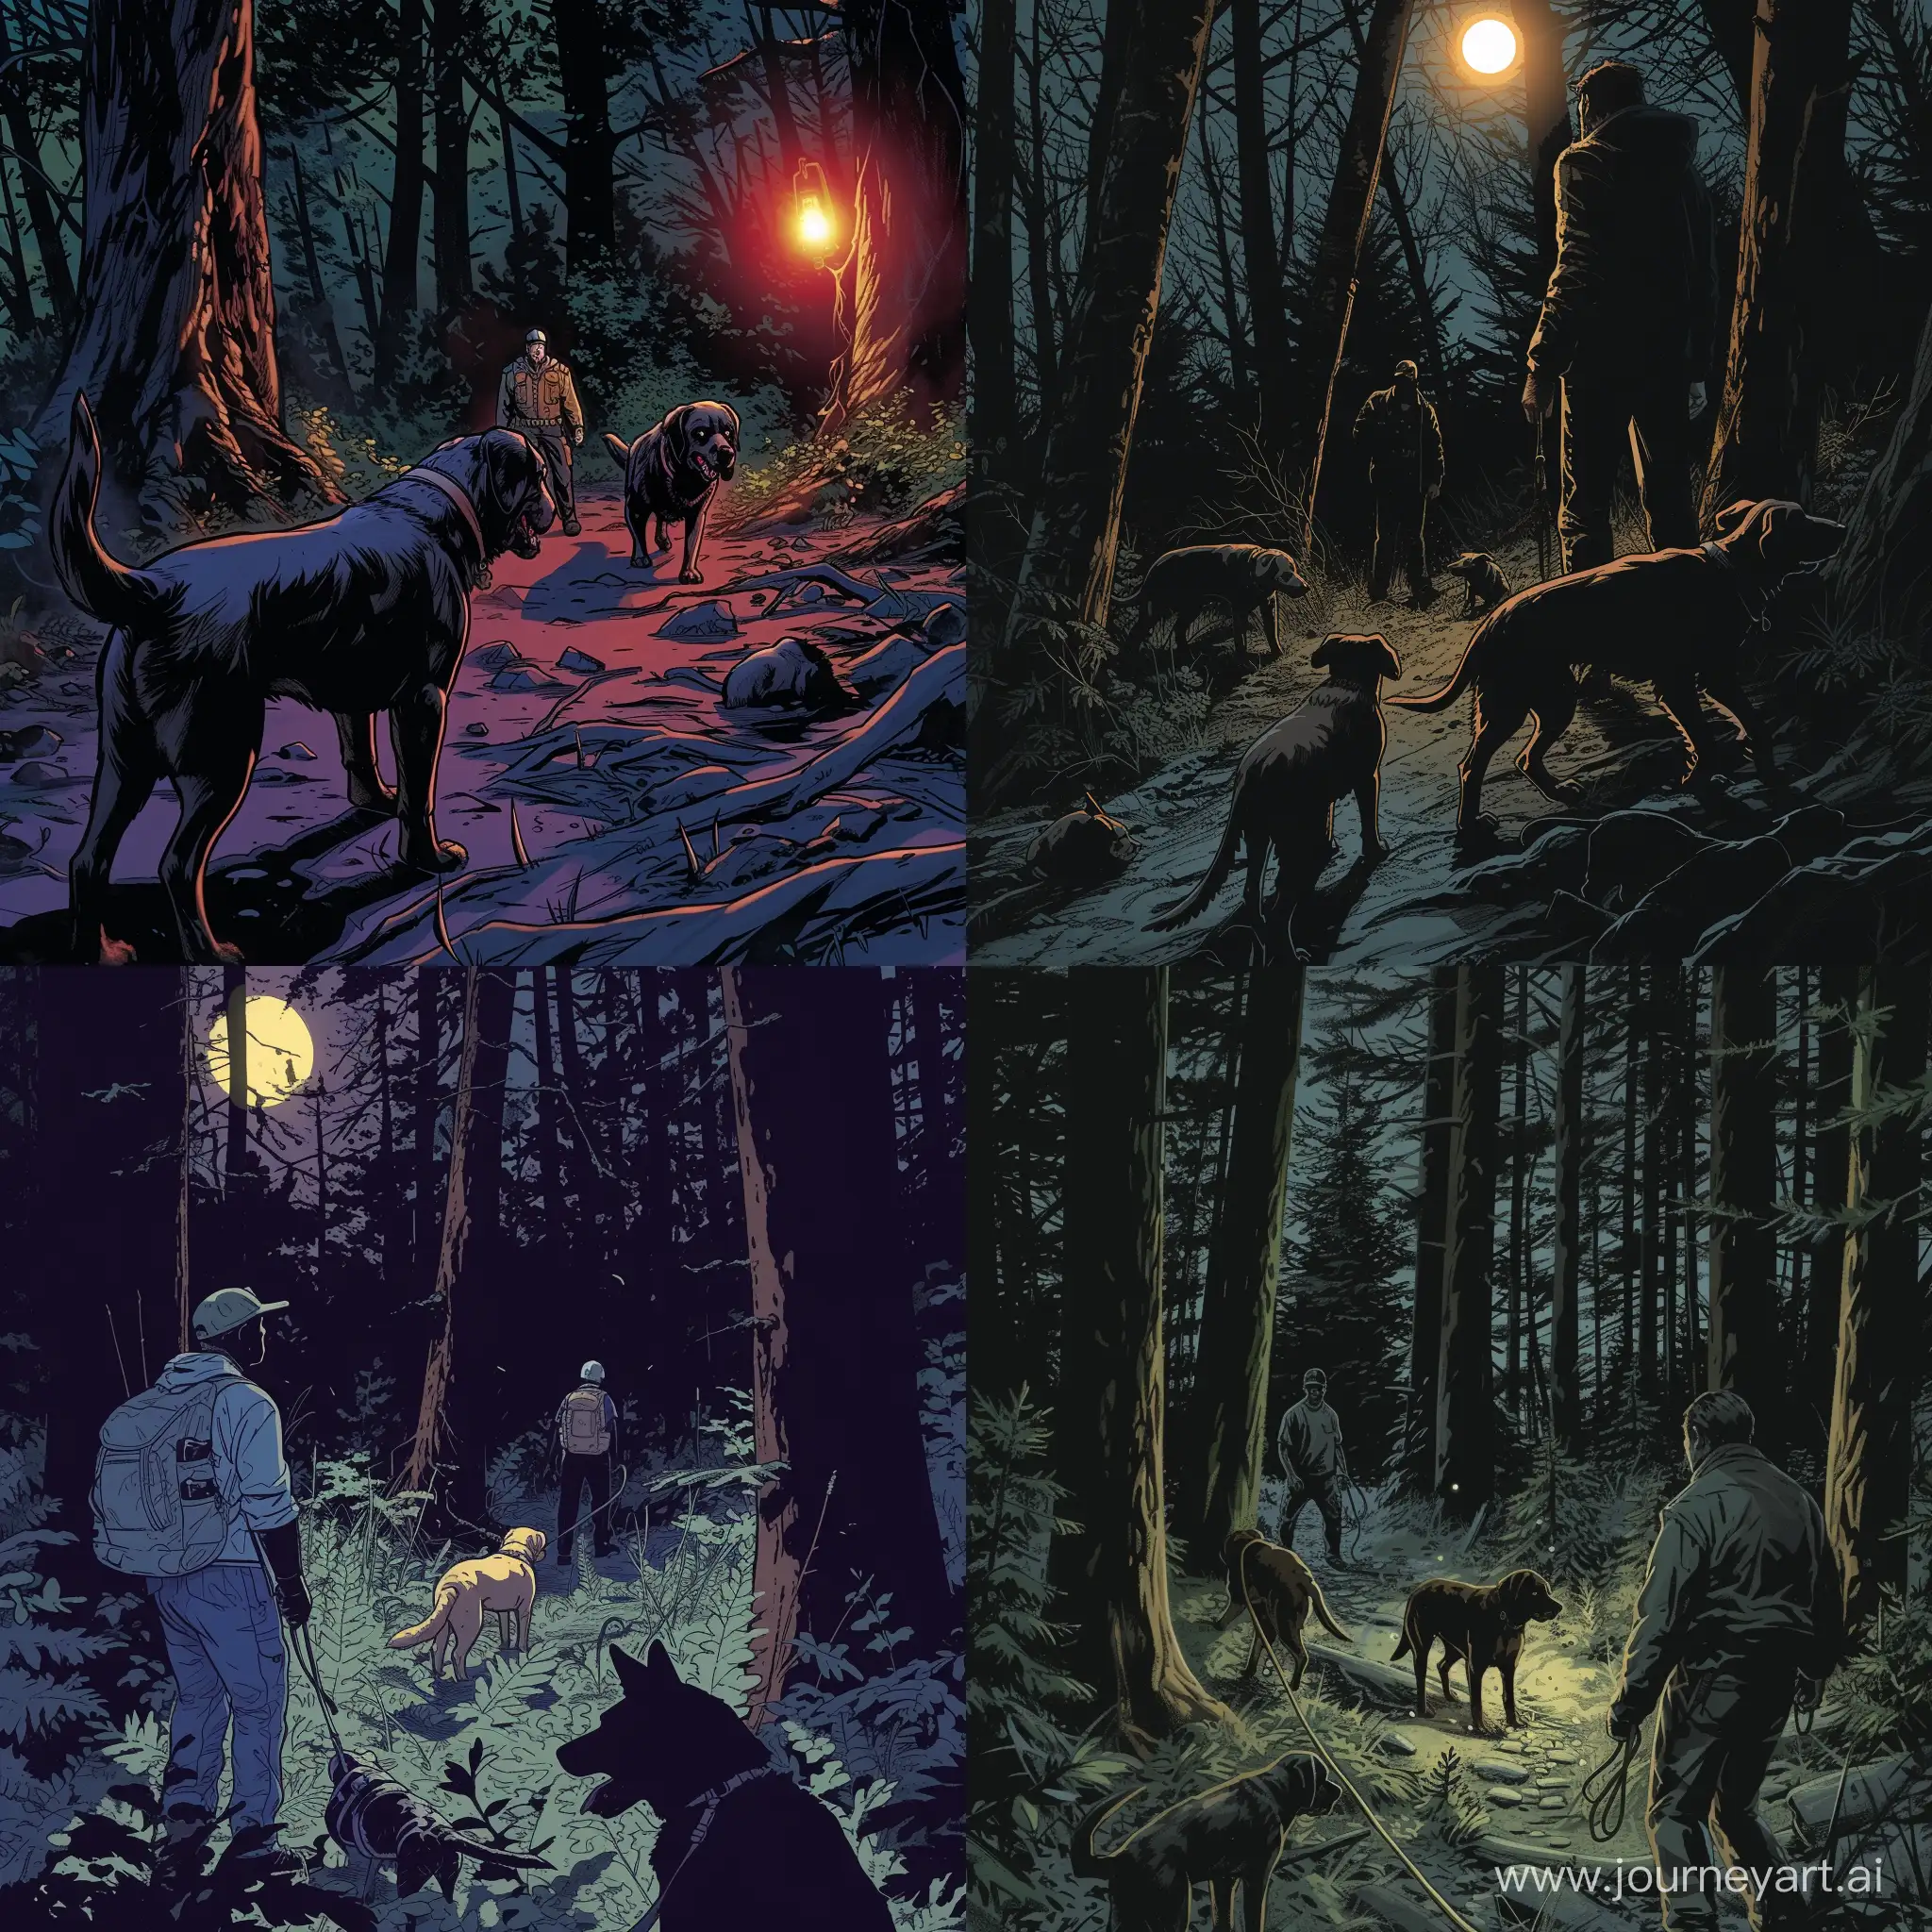 Search-and-Rescue-Dogs-in-the-Dark-Forest-Modern-American-Comic-Book-Style